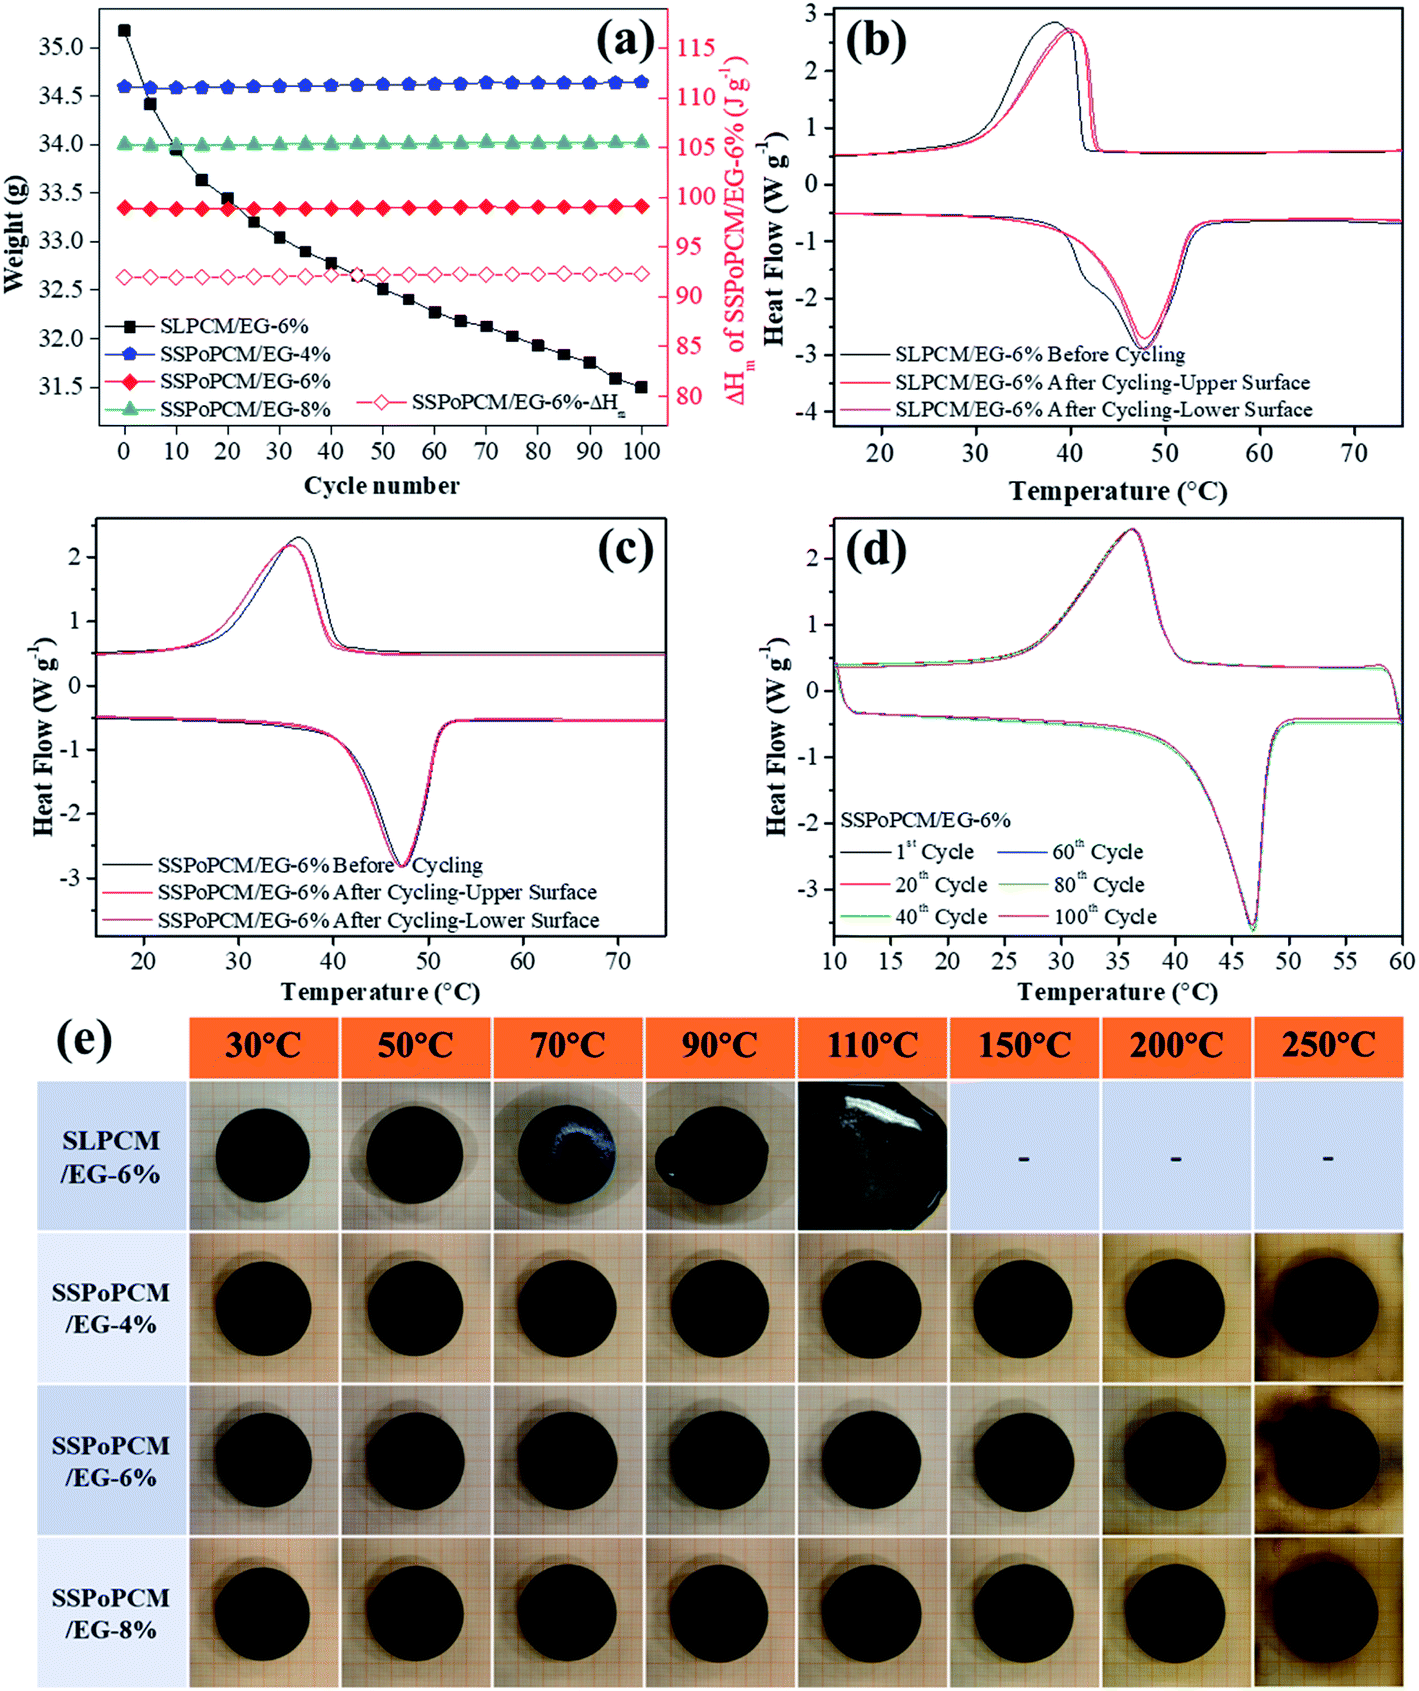 Custom Design Of Solid Solid Phase Change Material With Ultra High Thermal Stability For Battery Thermal Management Journal Of Materials Chemistry A Rsc Publishing